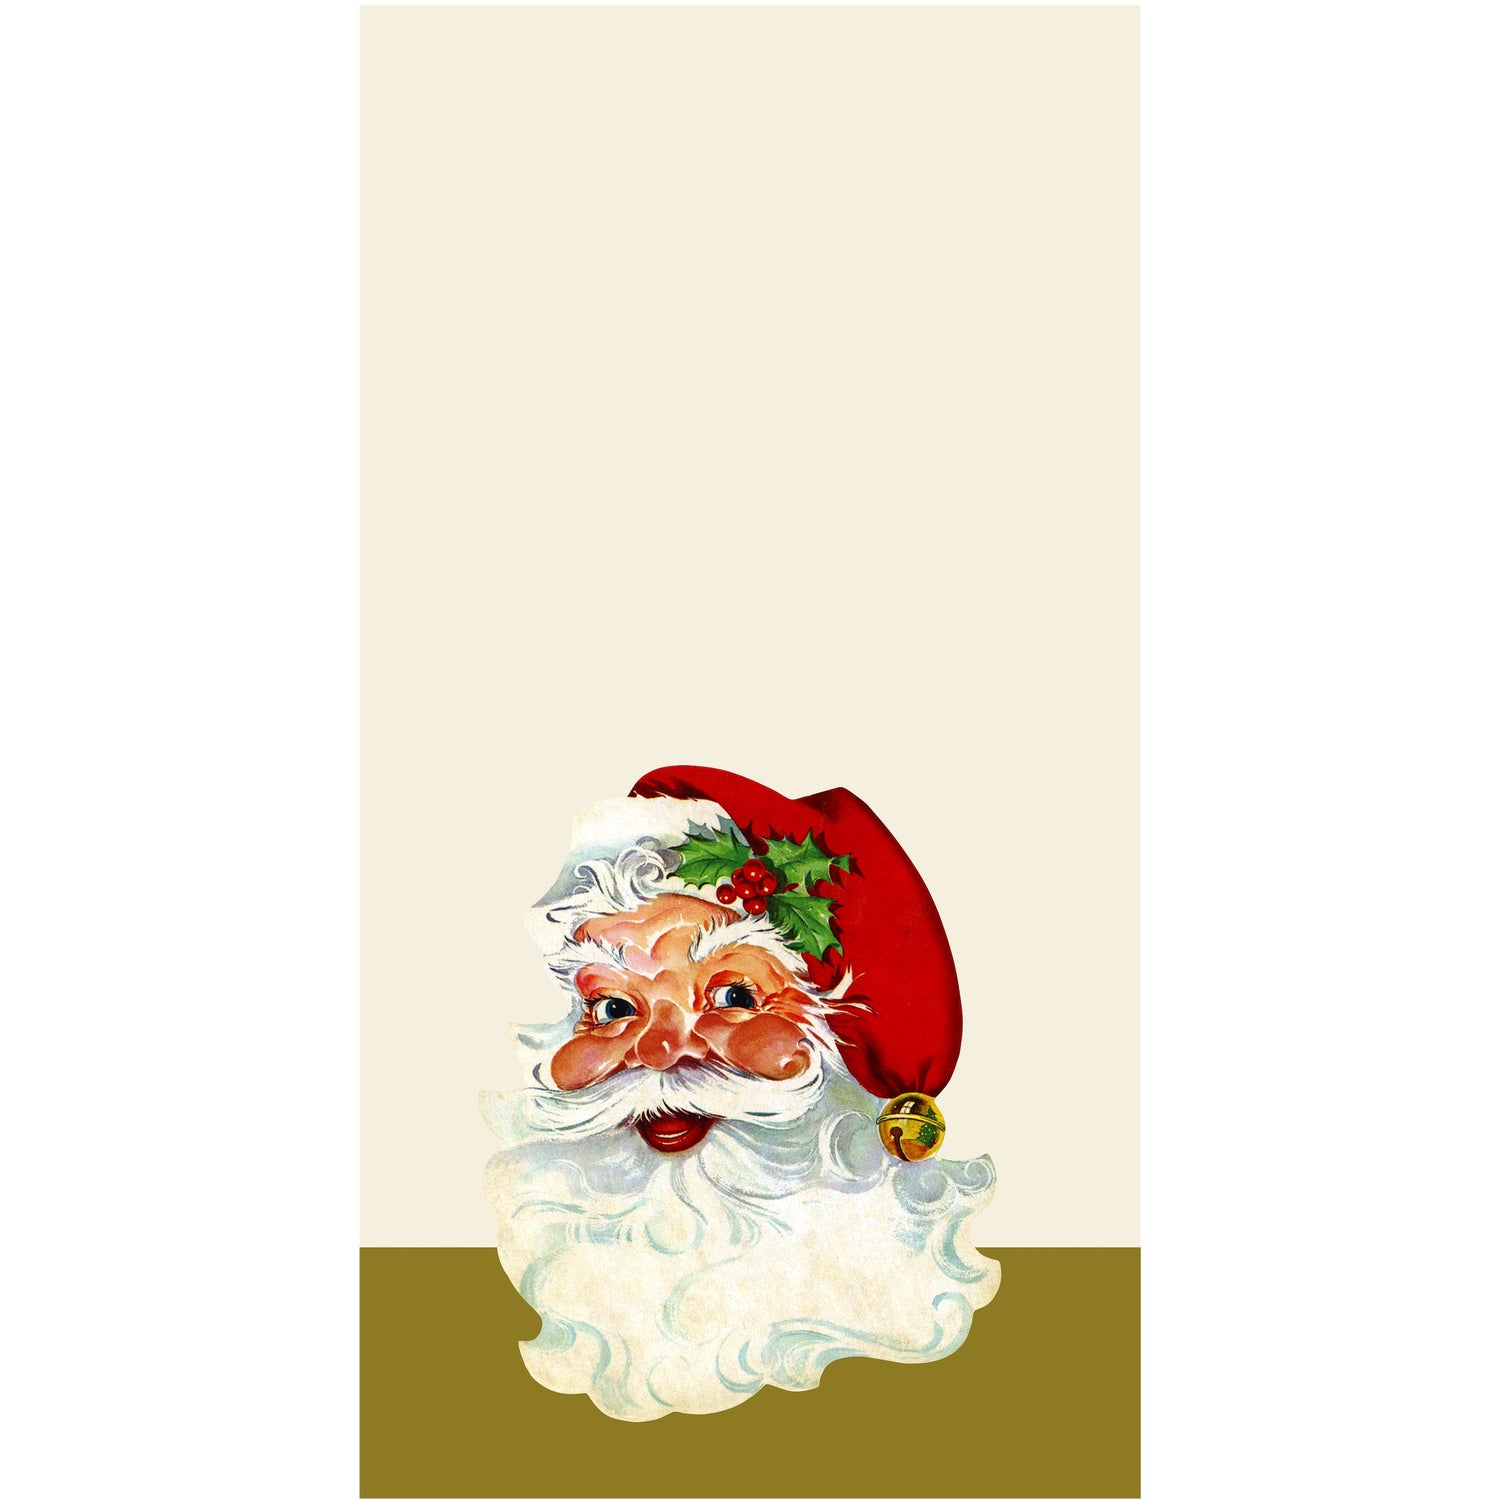 A festive Hester &amp; Cook Santa Napkins with a beard and hat bringing holiday cheer on a white background.